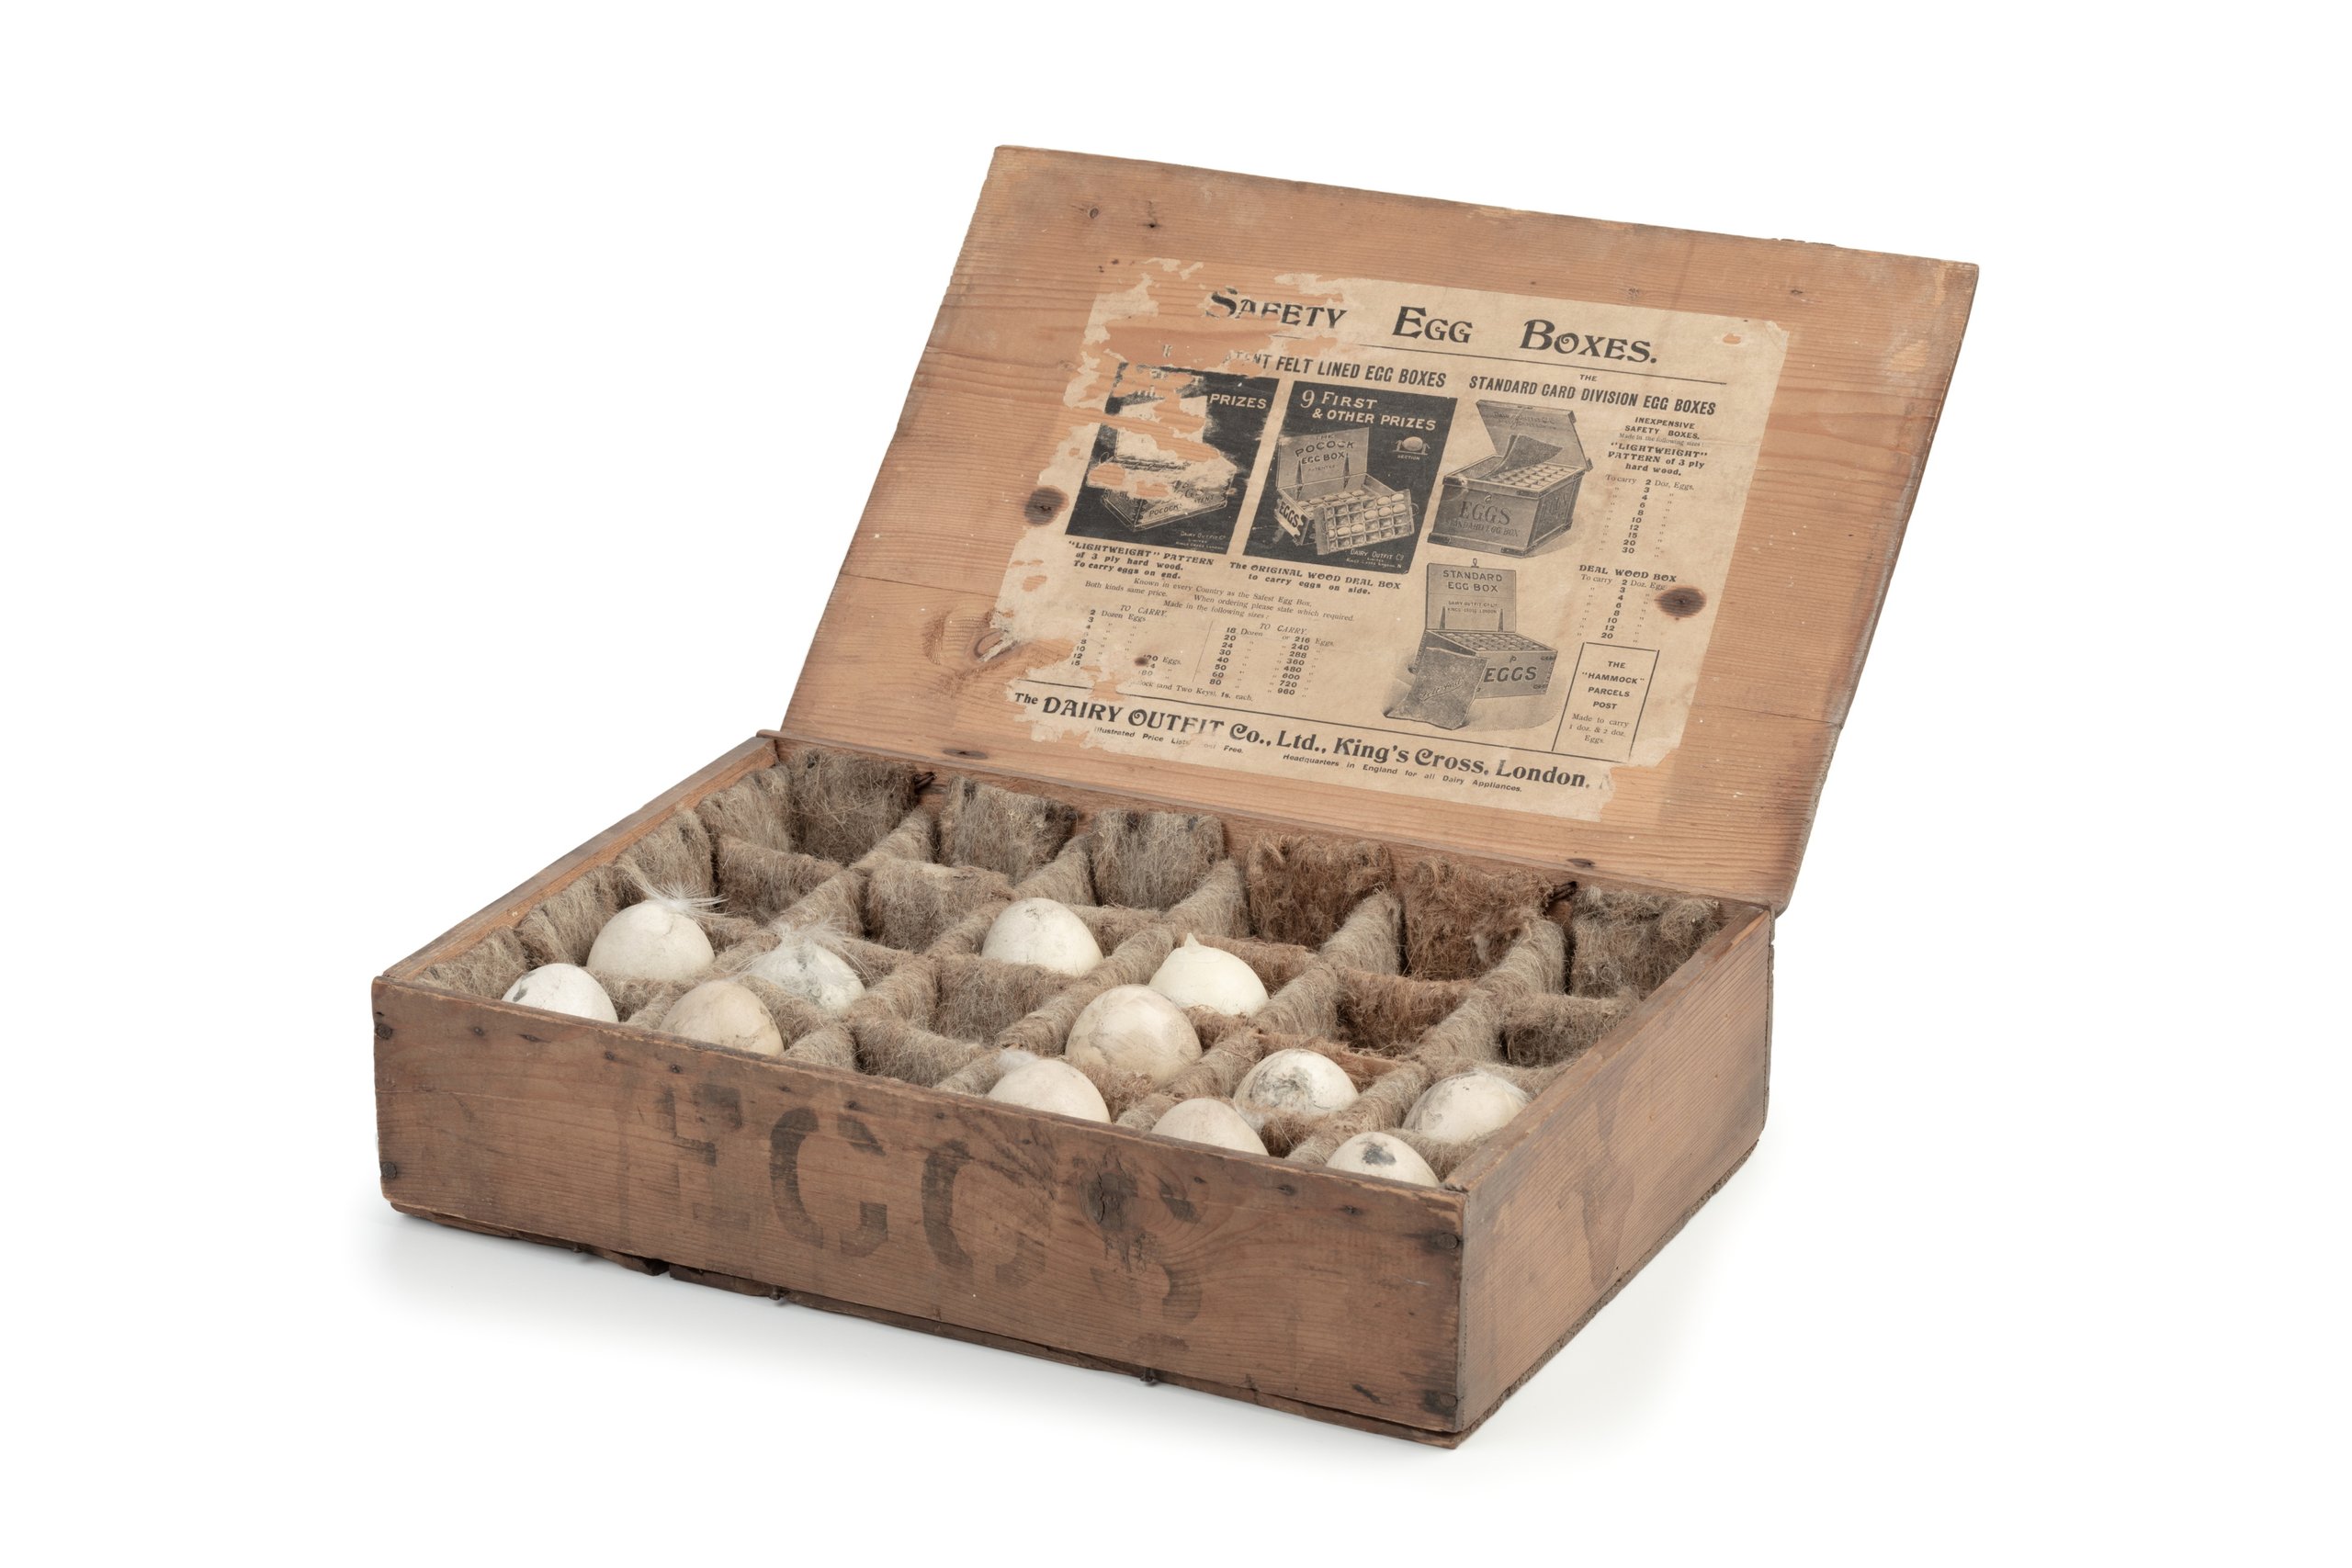 Egg box with eggs by the Dairy Outfit Co Limited England